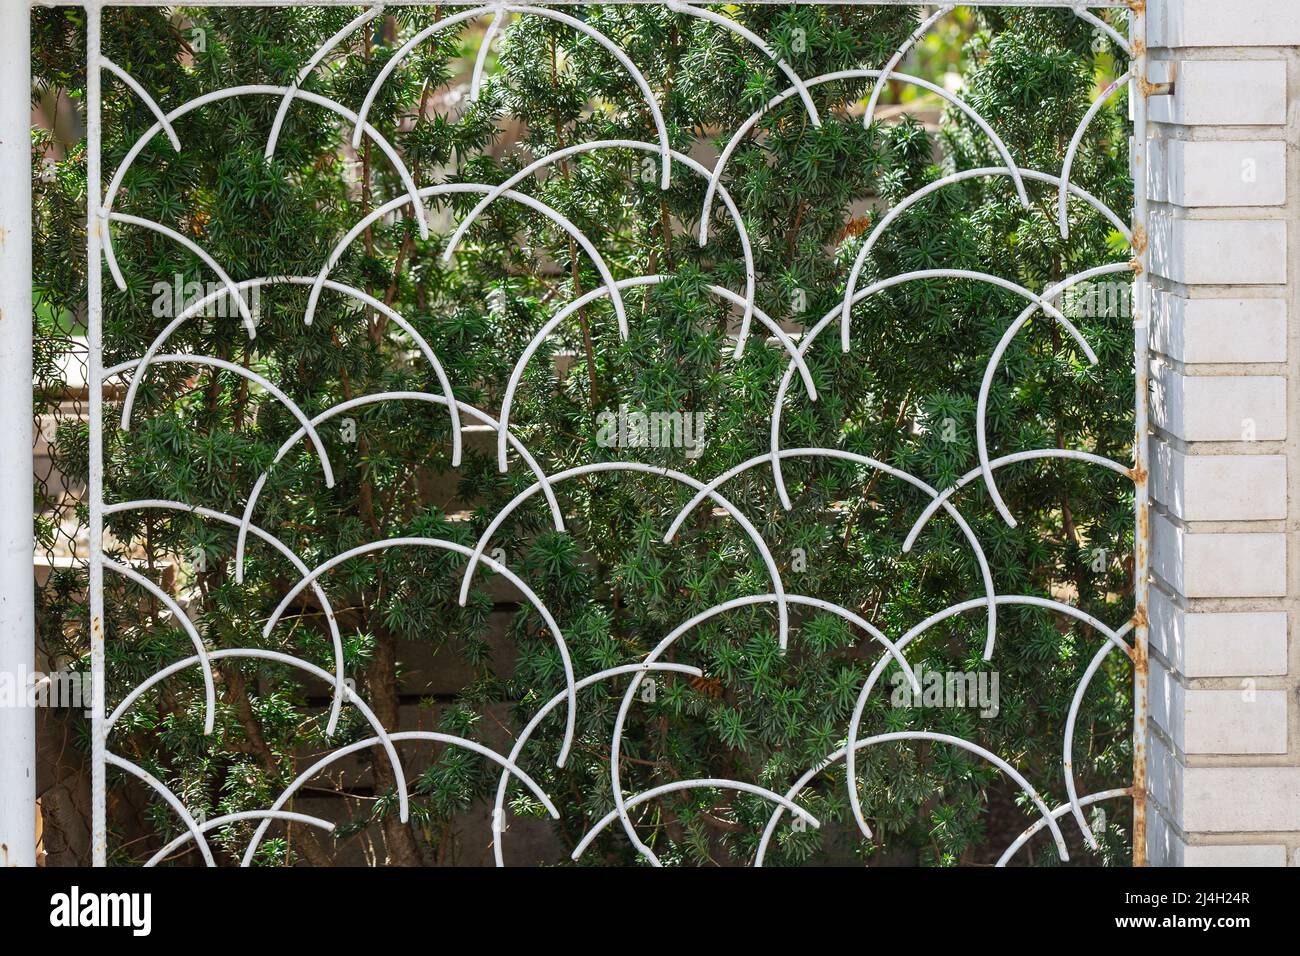 Green Taxus cuspidata, the Japanese yew or spreading yew behind the old vintage iron lattice fence with rust and chipped white paint Stock Photo